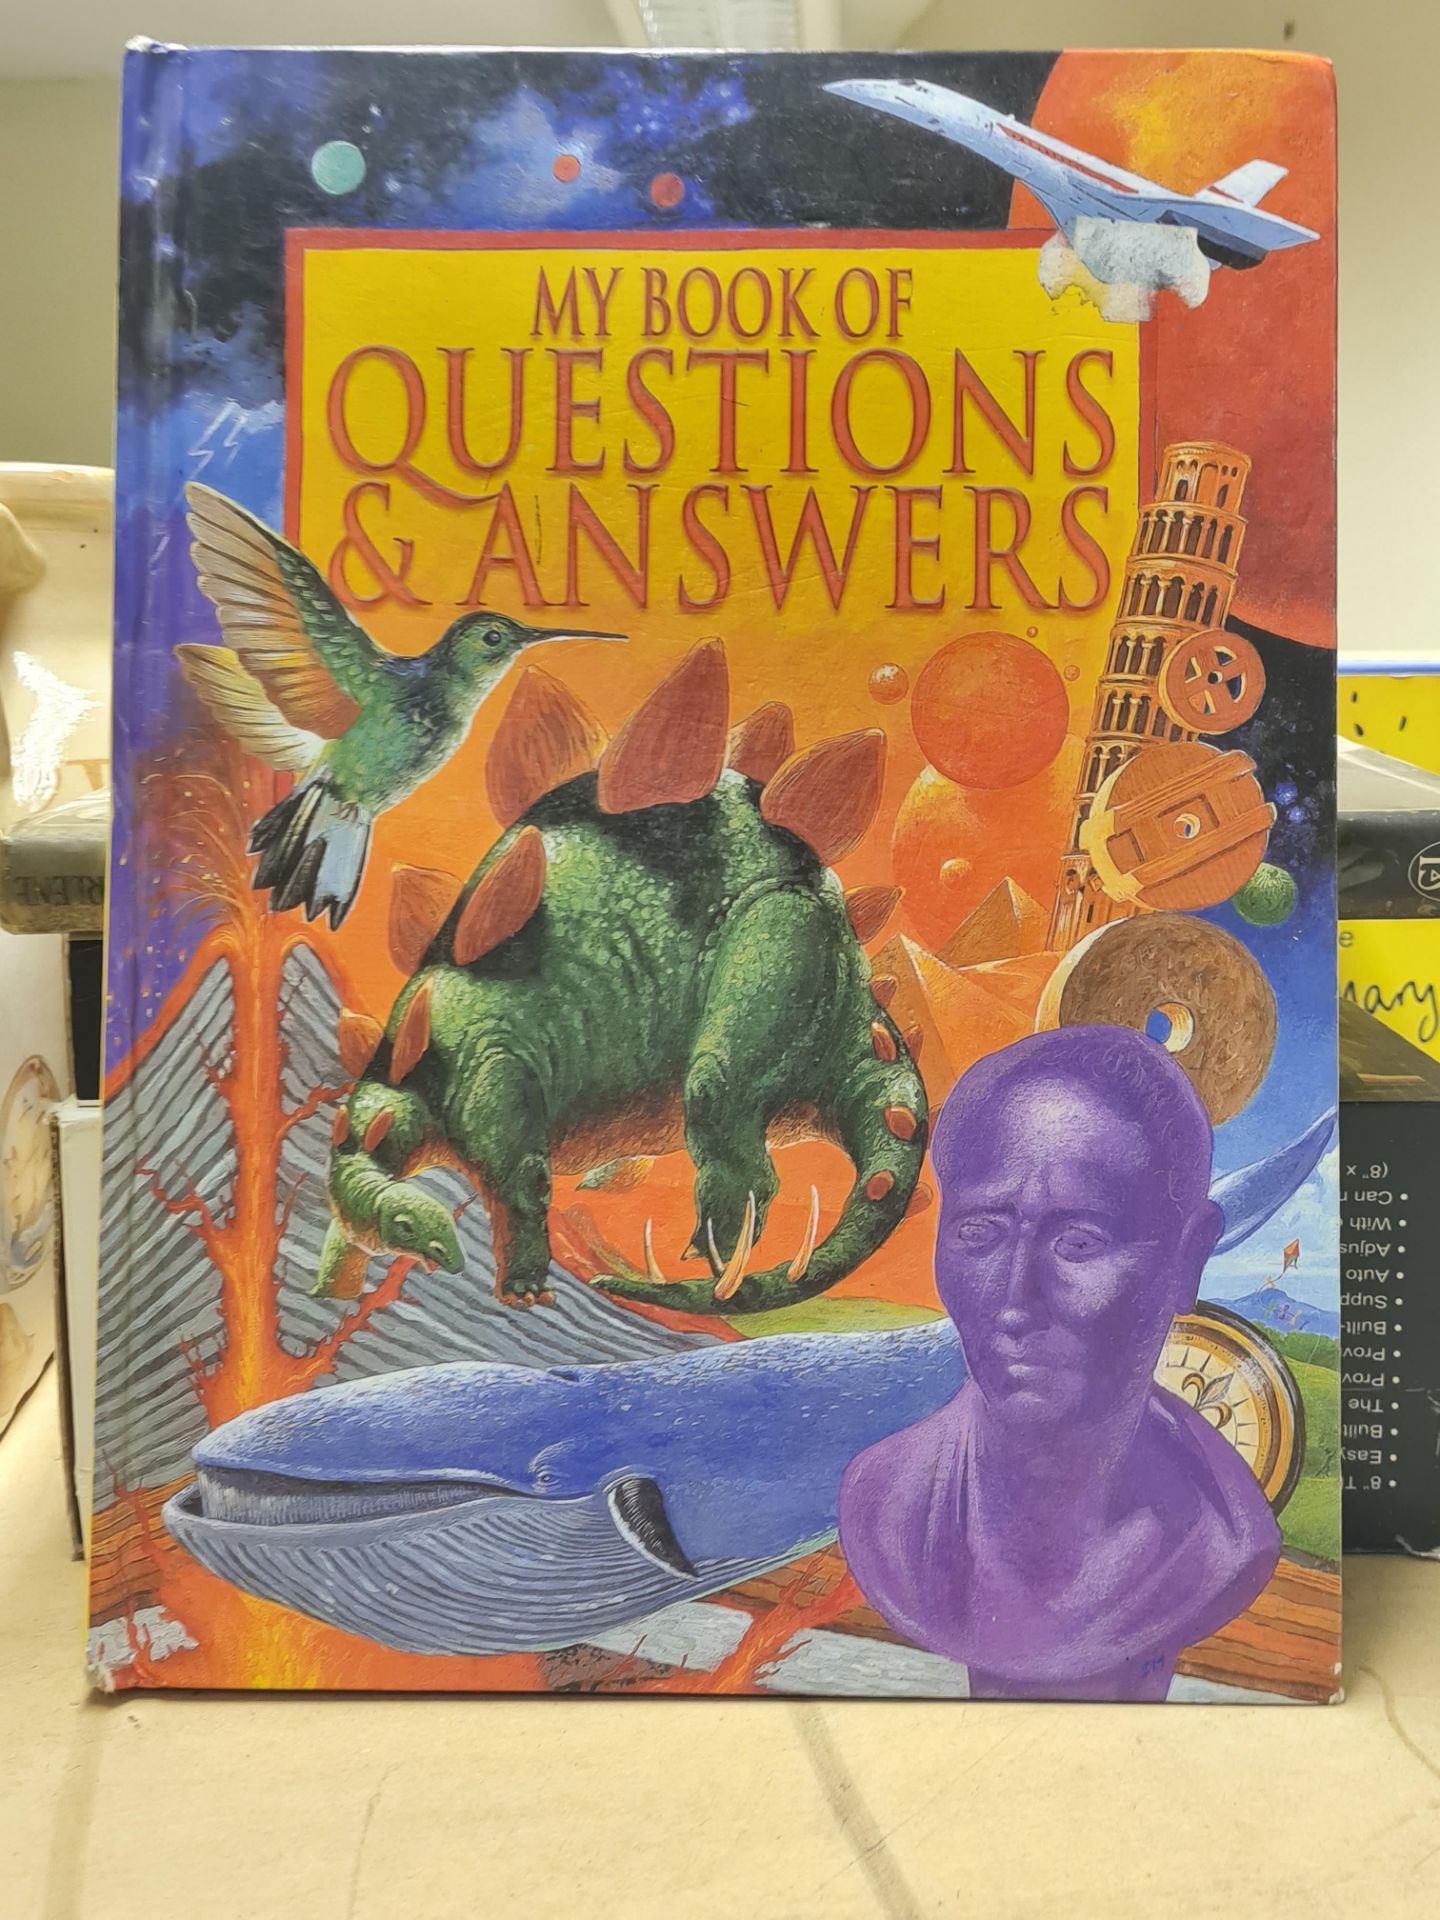 My book in questions & answers